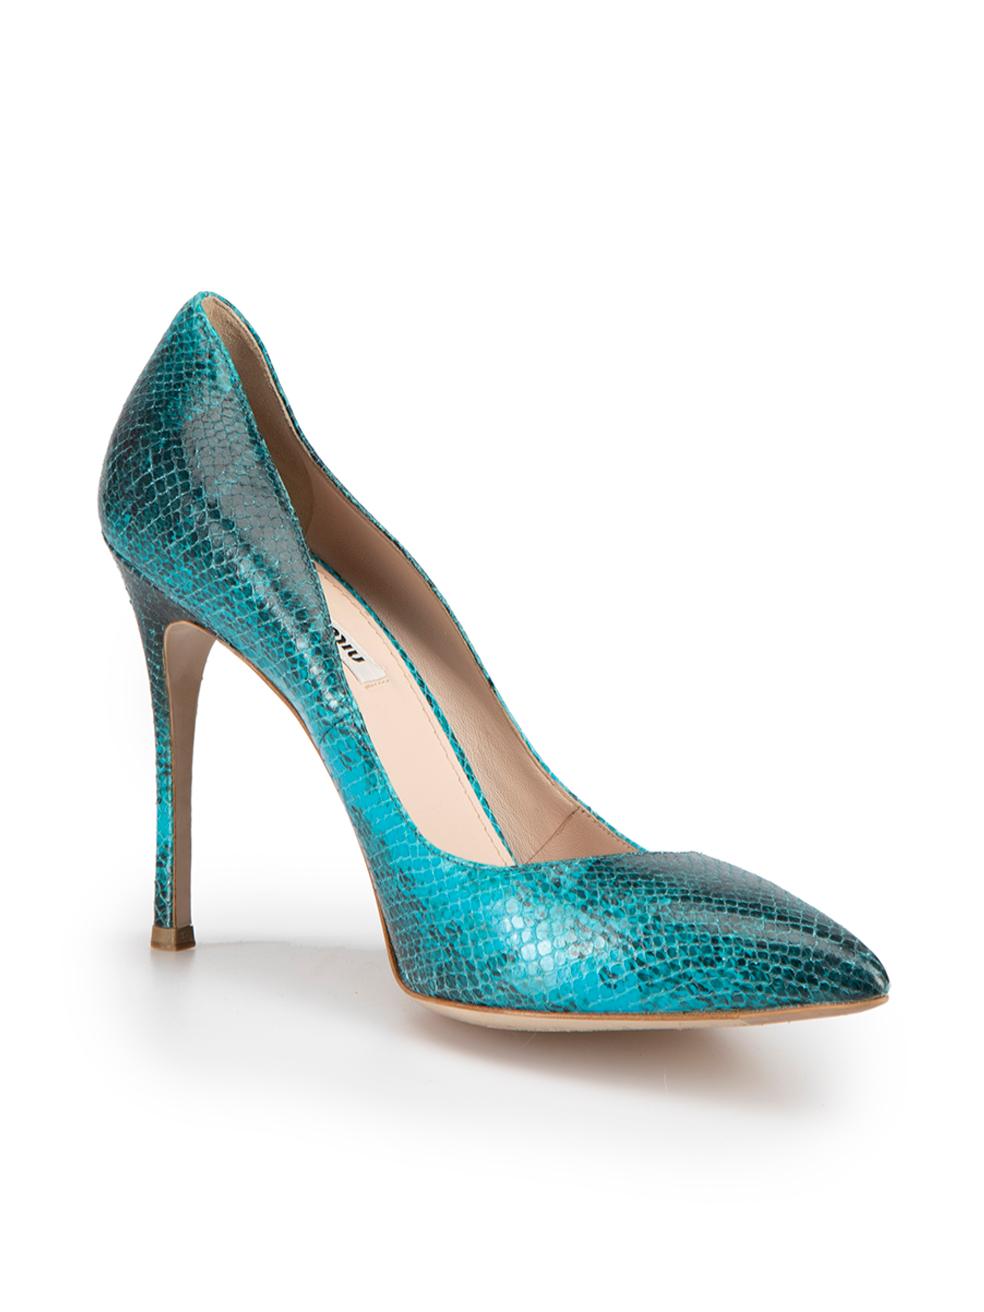 CONDITION is Very good. Minimal wear to shoes is evident. Minimal wear to the right-side of right shoe with discoloured marks on this used Miu Miu designer resale item.



Details


Turquoise

Snakeskin

Slip-on pumps

Point-toe



 

Made in